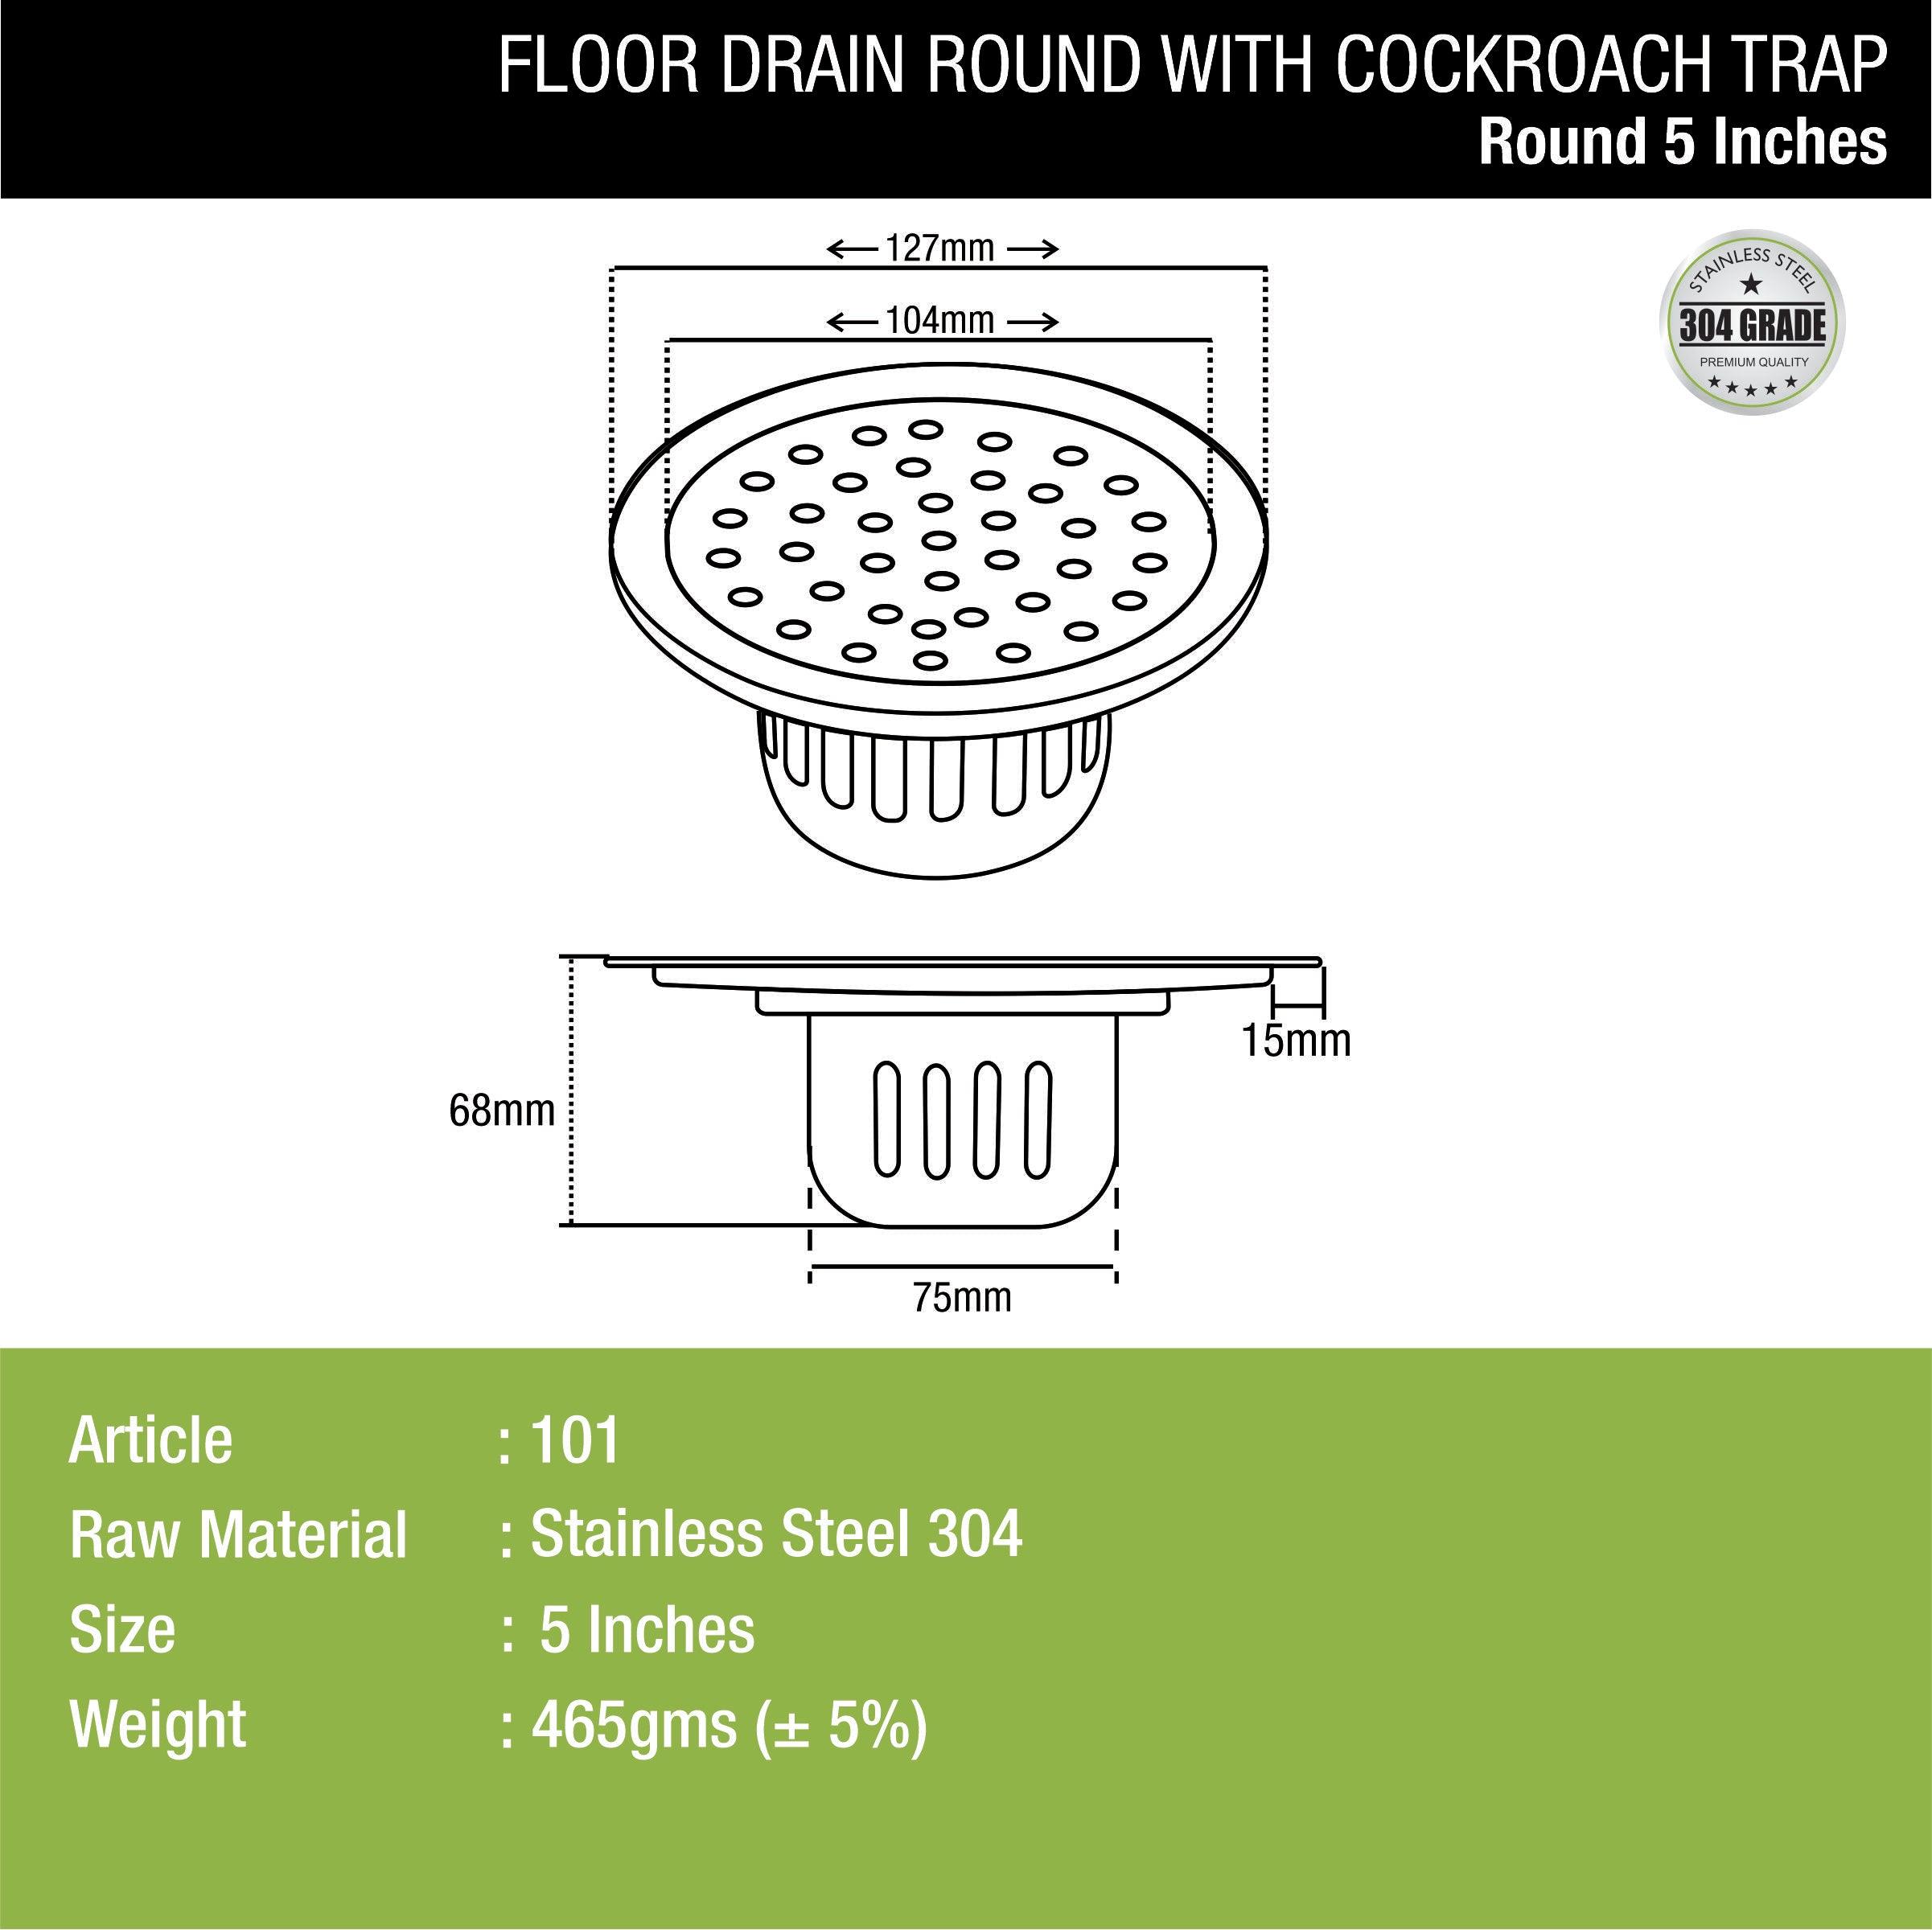 Round Floor Drain (5 inches) with Cockroach Trap dimensions and sizes